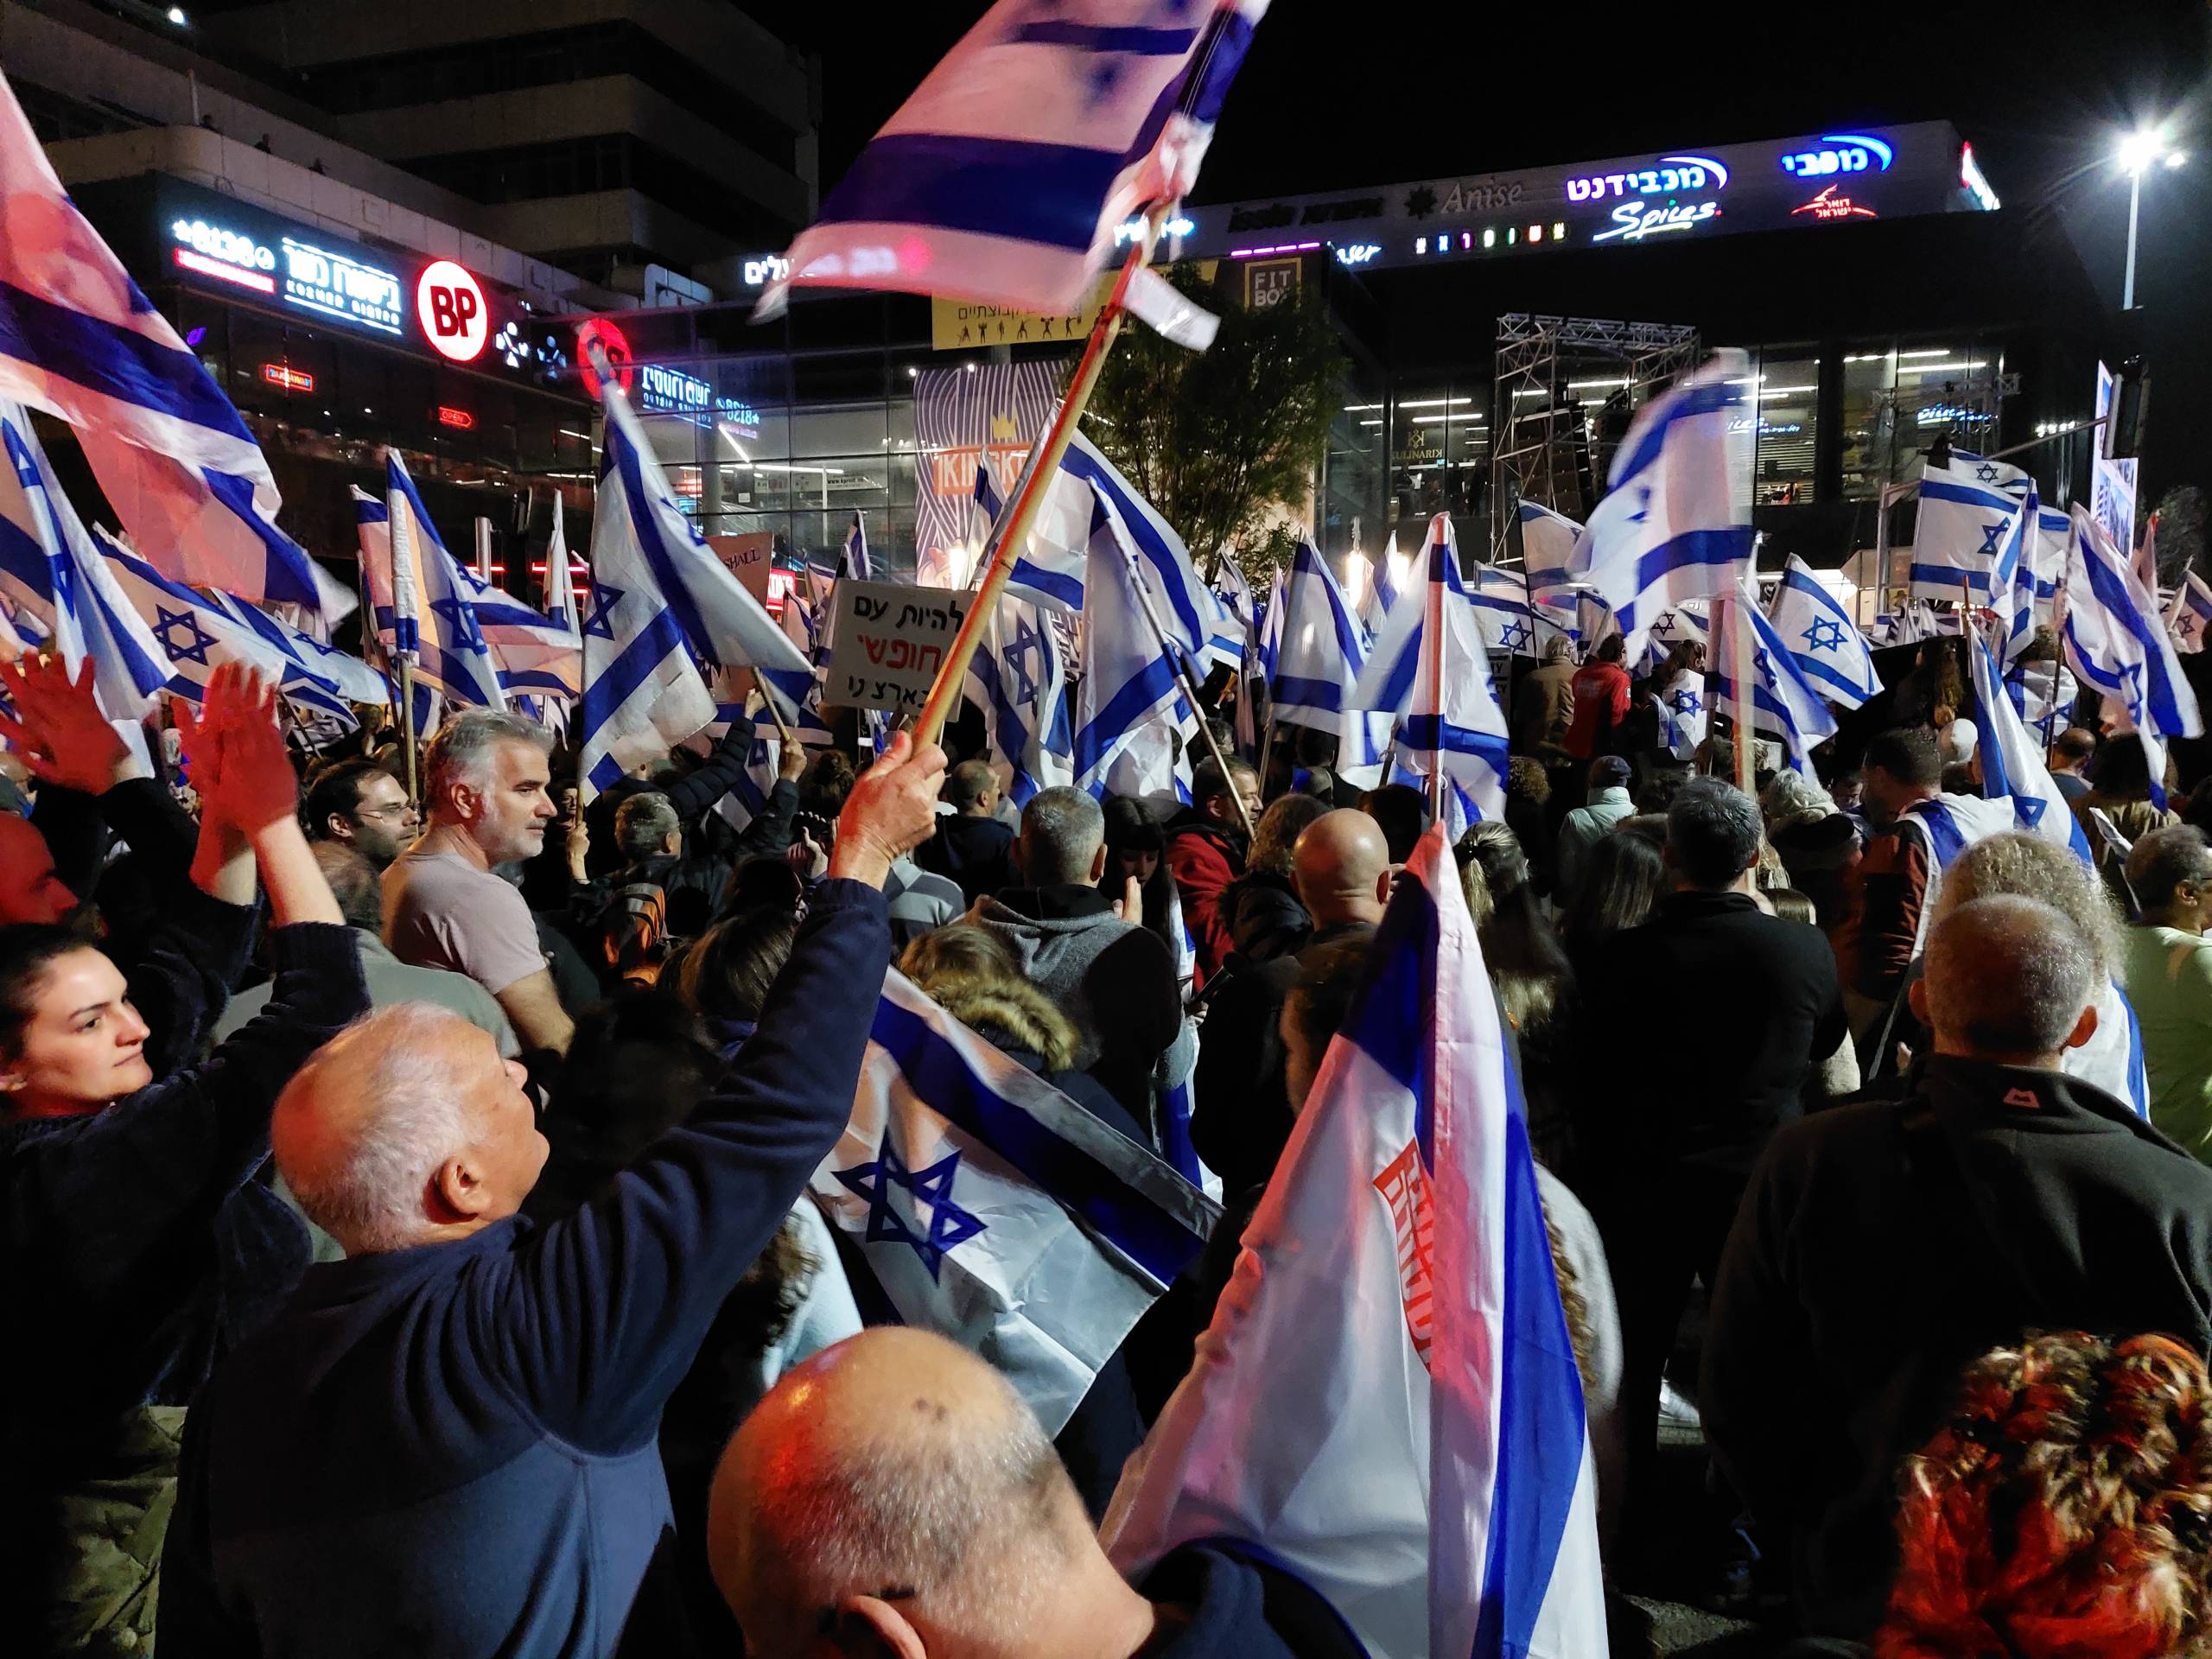 The largest protests in the history of Israel against the judicial overhaul led by the Netanyahu